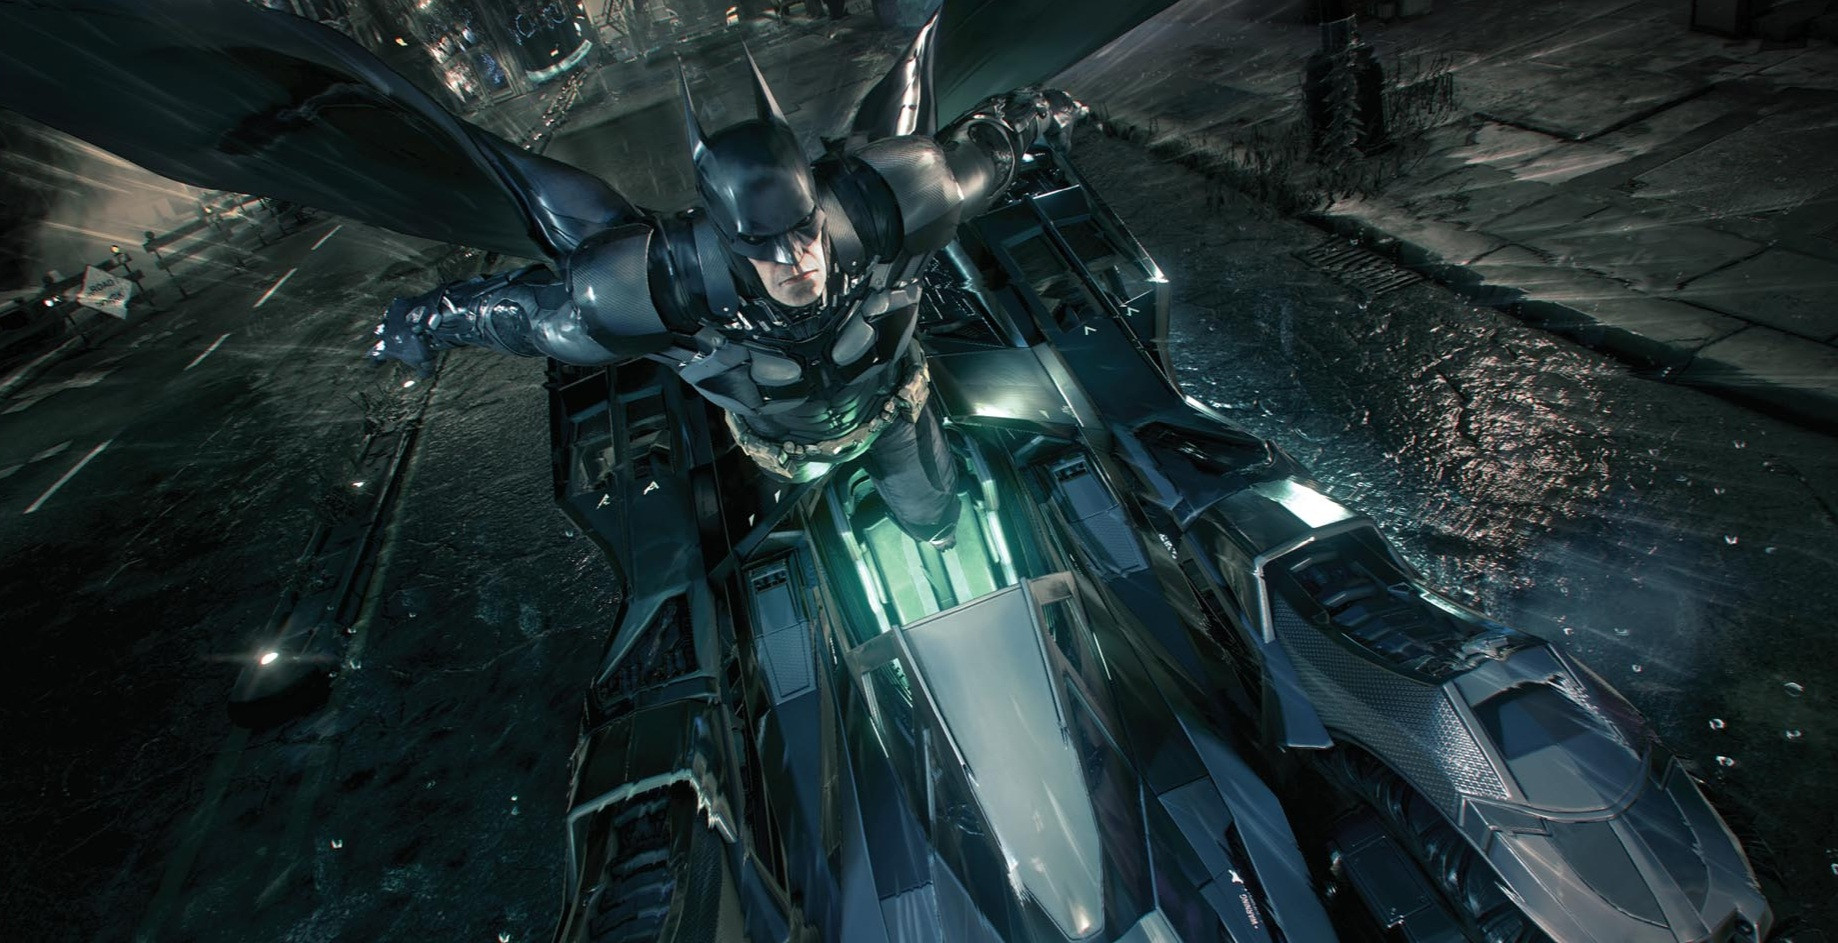 “Batman: Arkham Knight” PC Port Interim Patch Coming August - Hopes the Fixes Will Address Issues